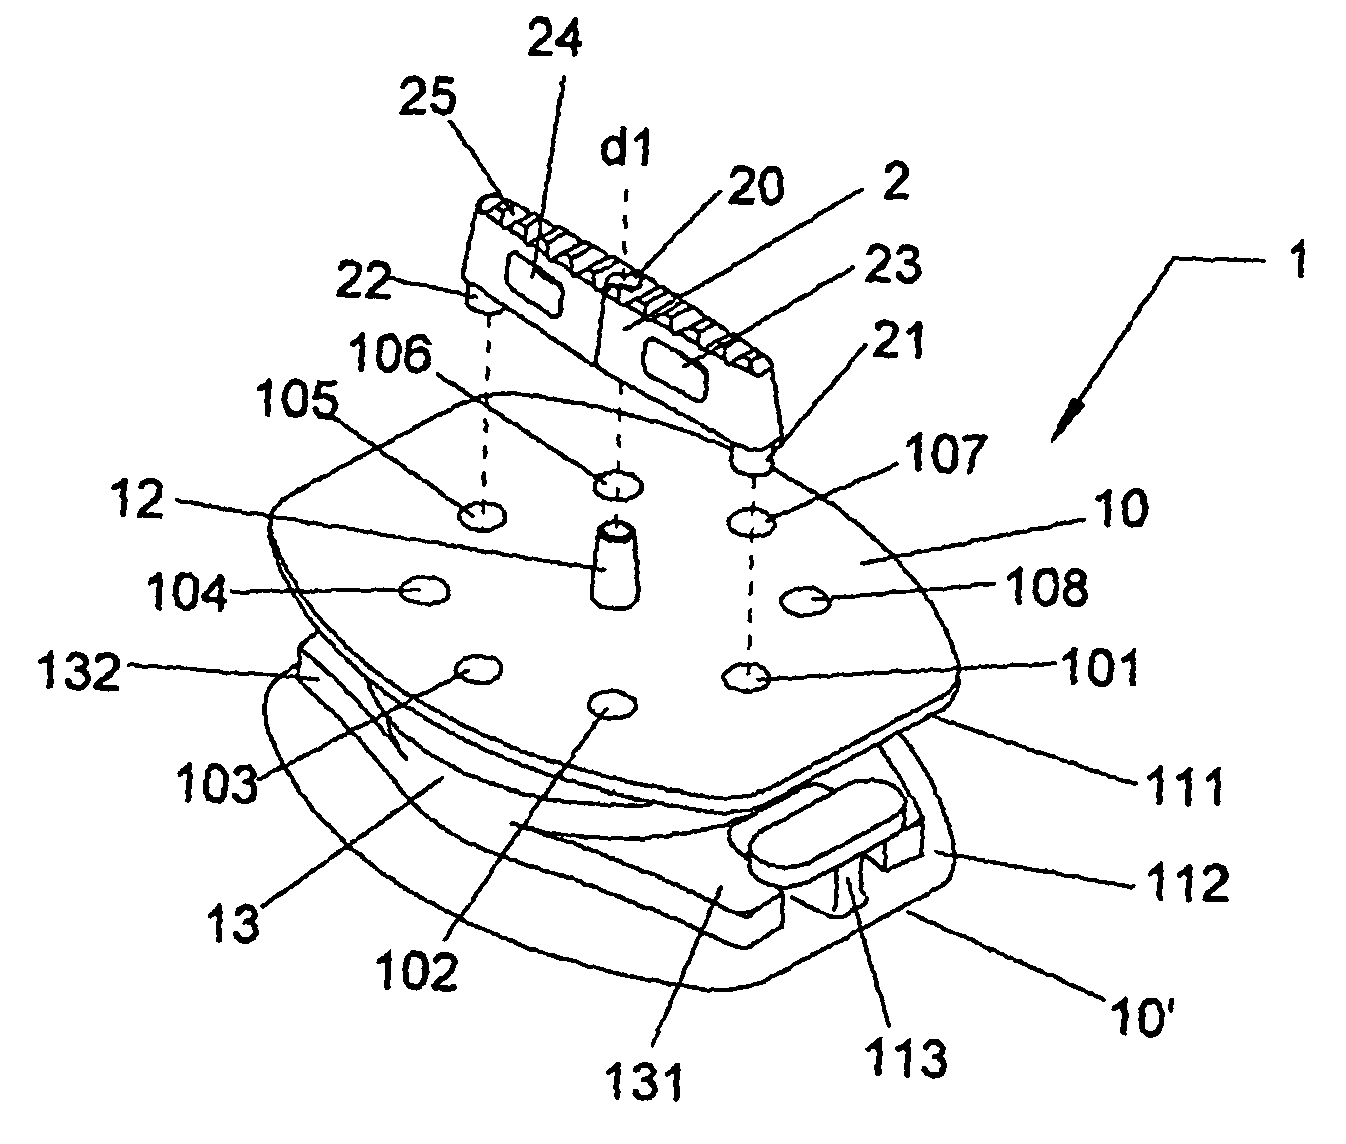 Osseous achoring device for a prosthesis